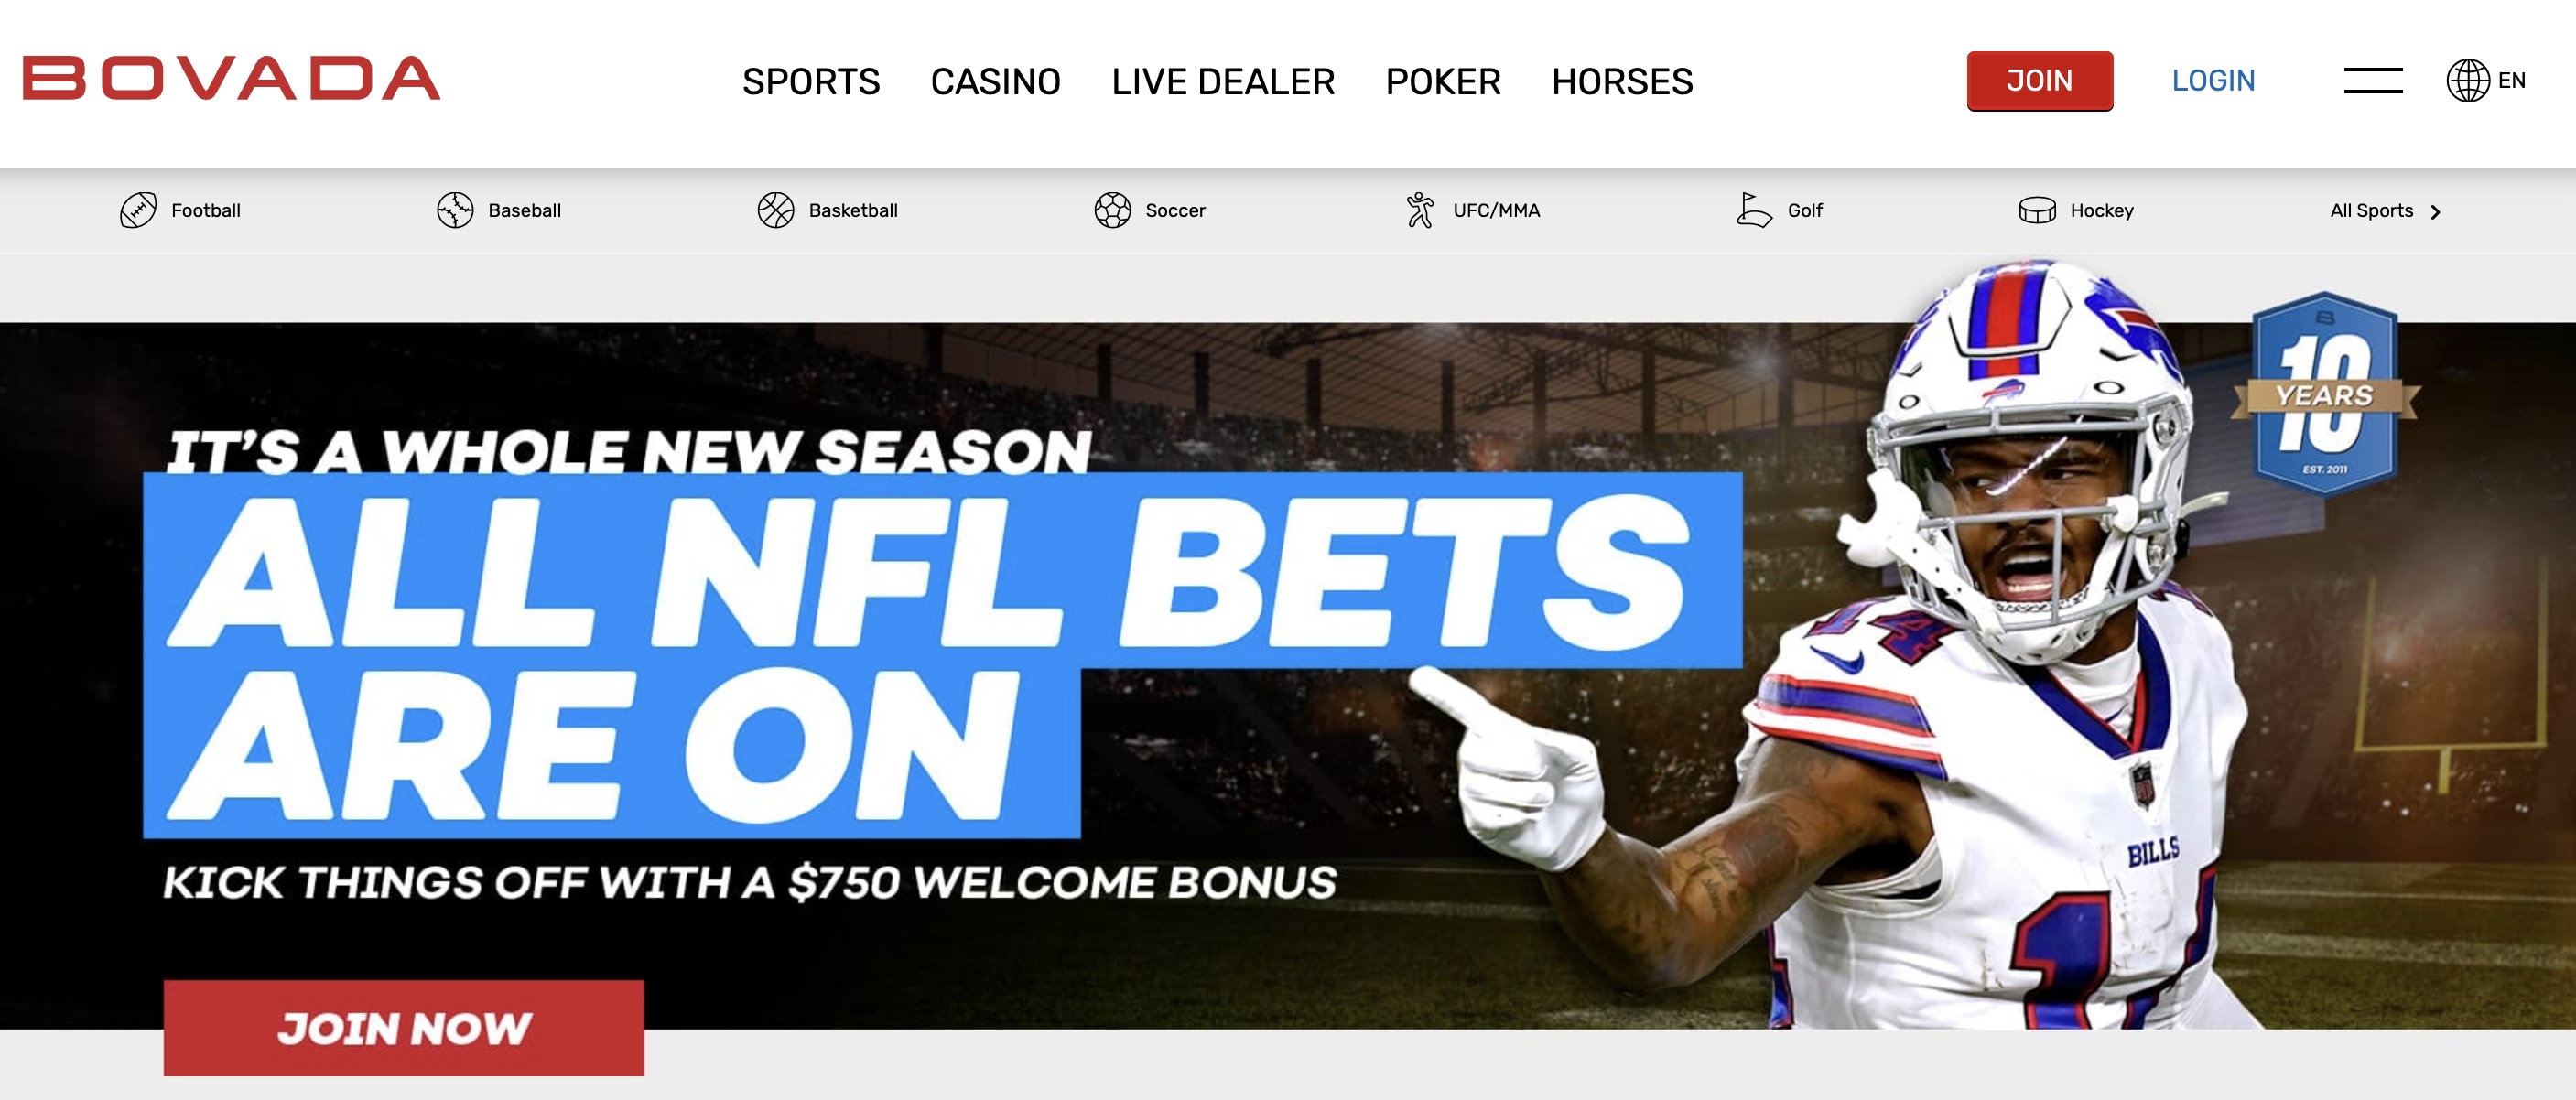 bovada crypto betting site